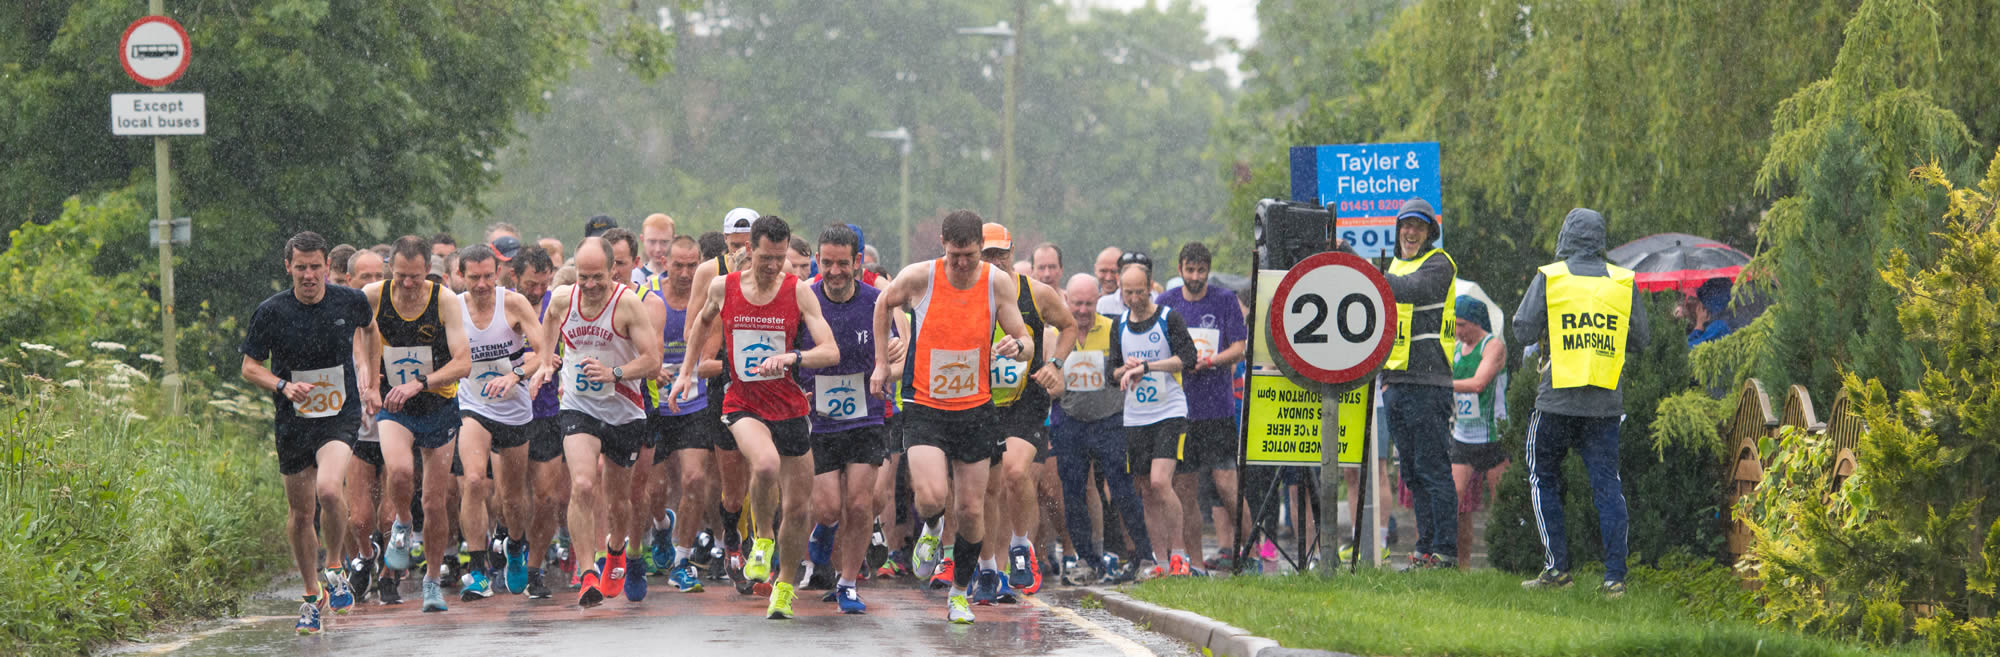 Start of the 2018 Humph's Hilly Half